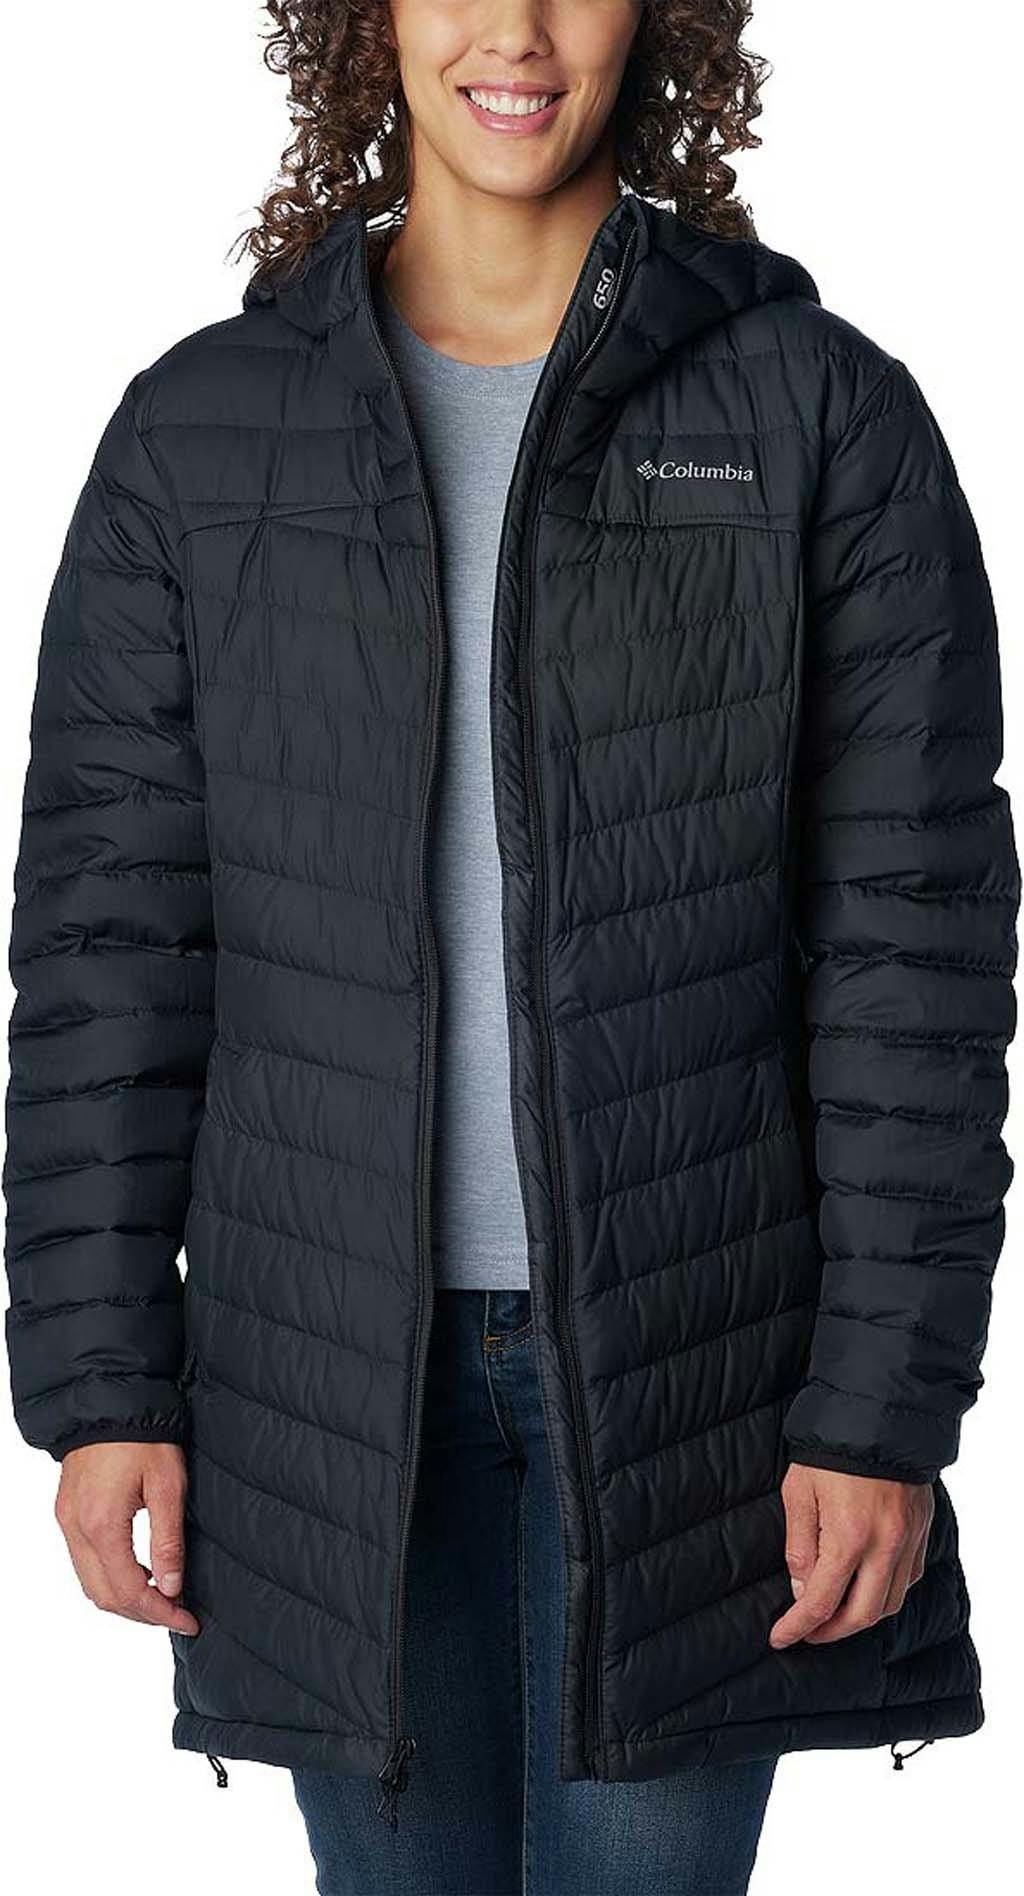 Product image for Westridge Mid Down Jacket - Women's.